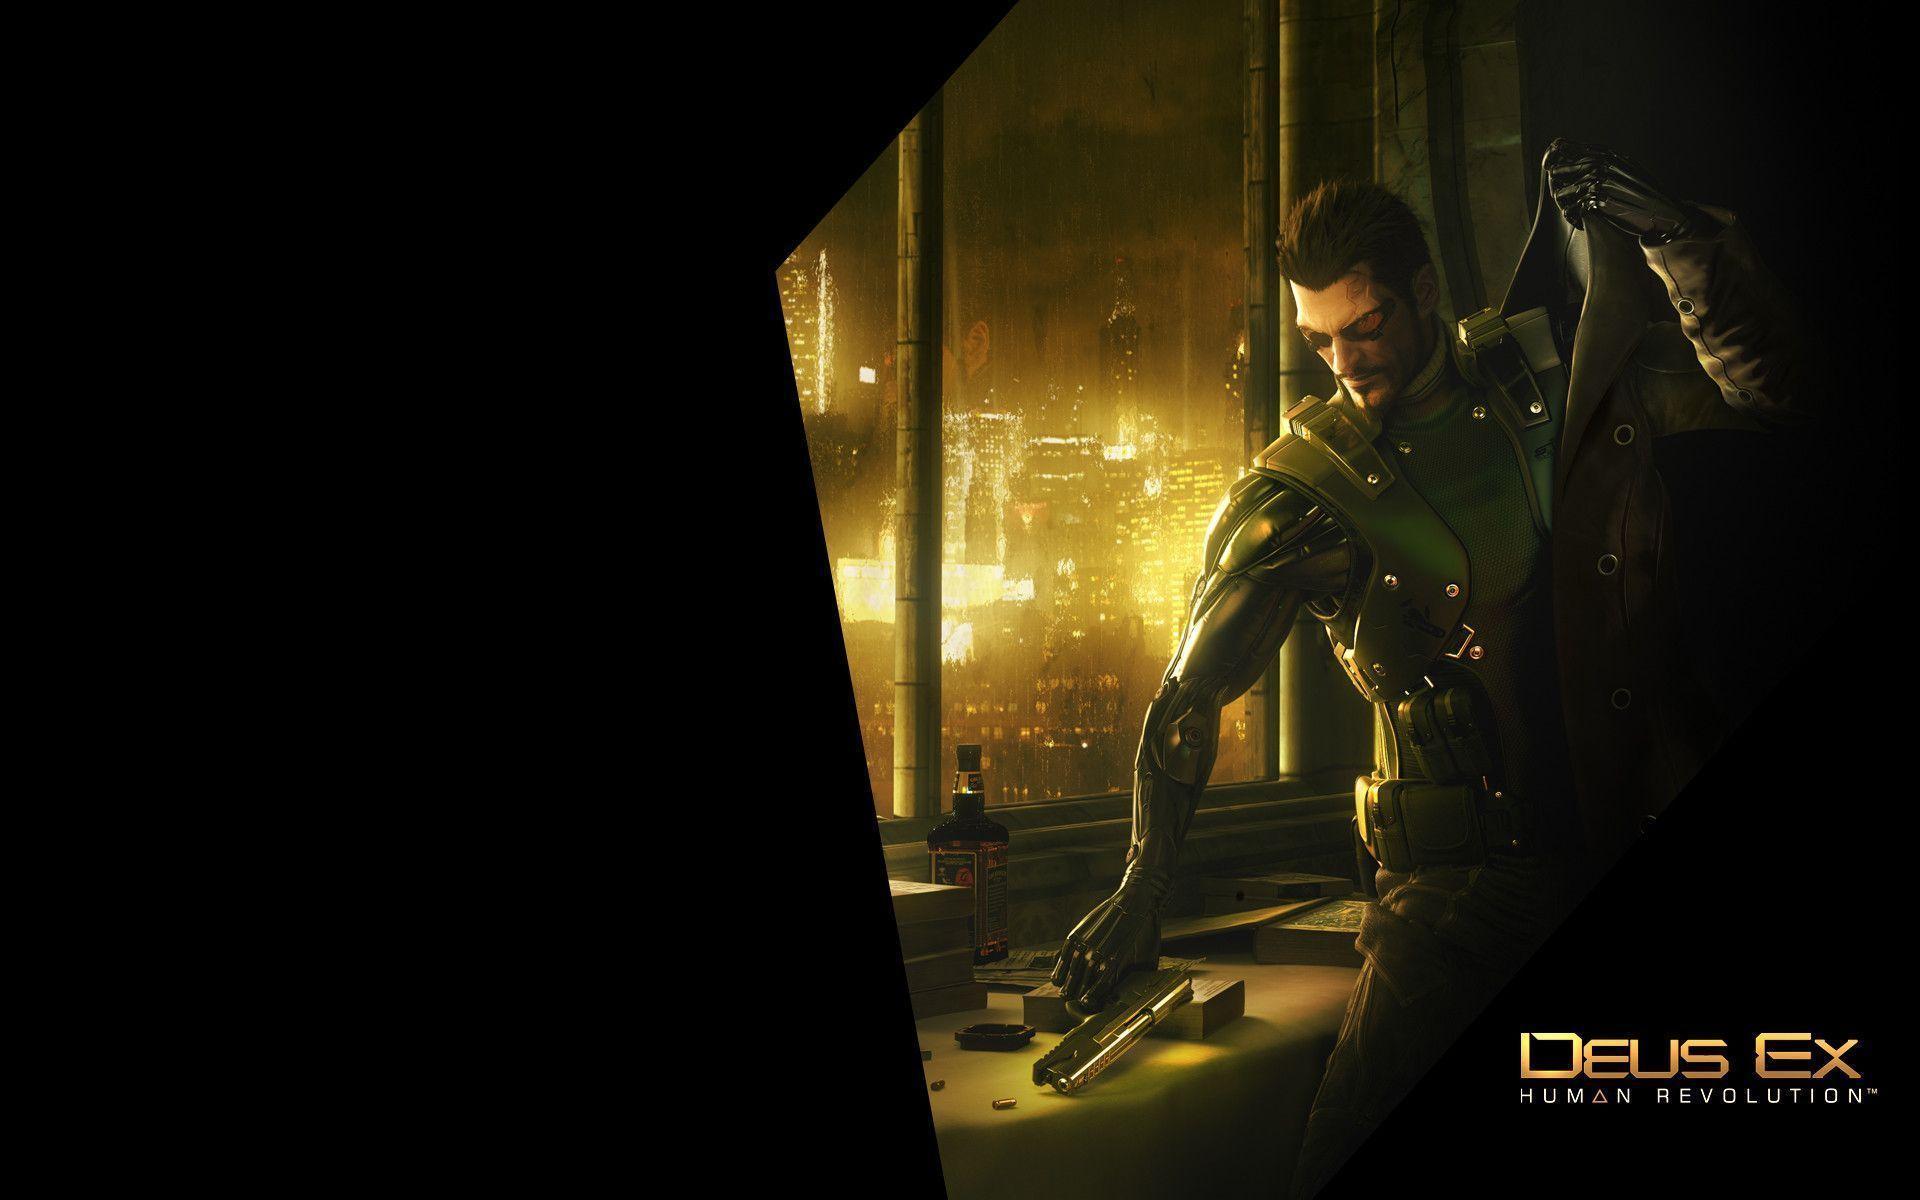 Deus Ex Human Revolution Wallpapers Ready for Action